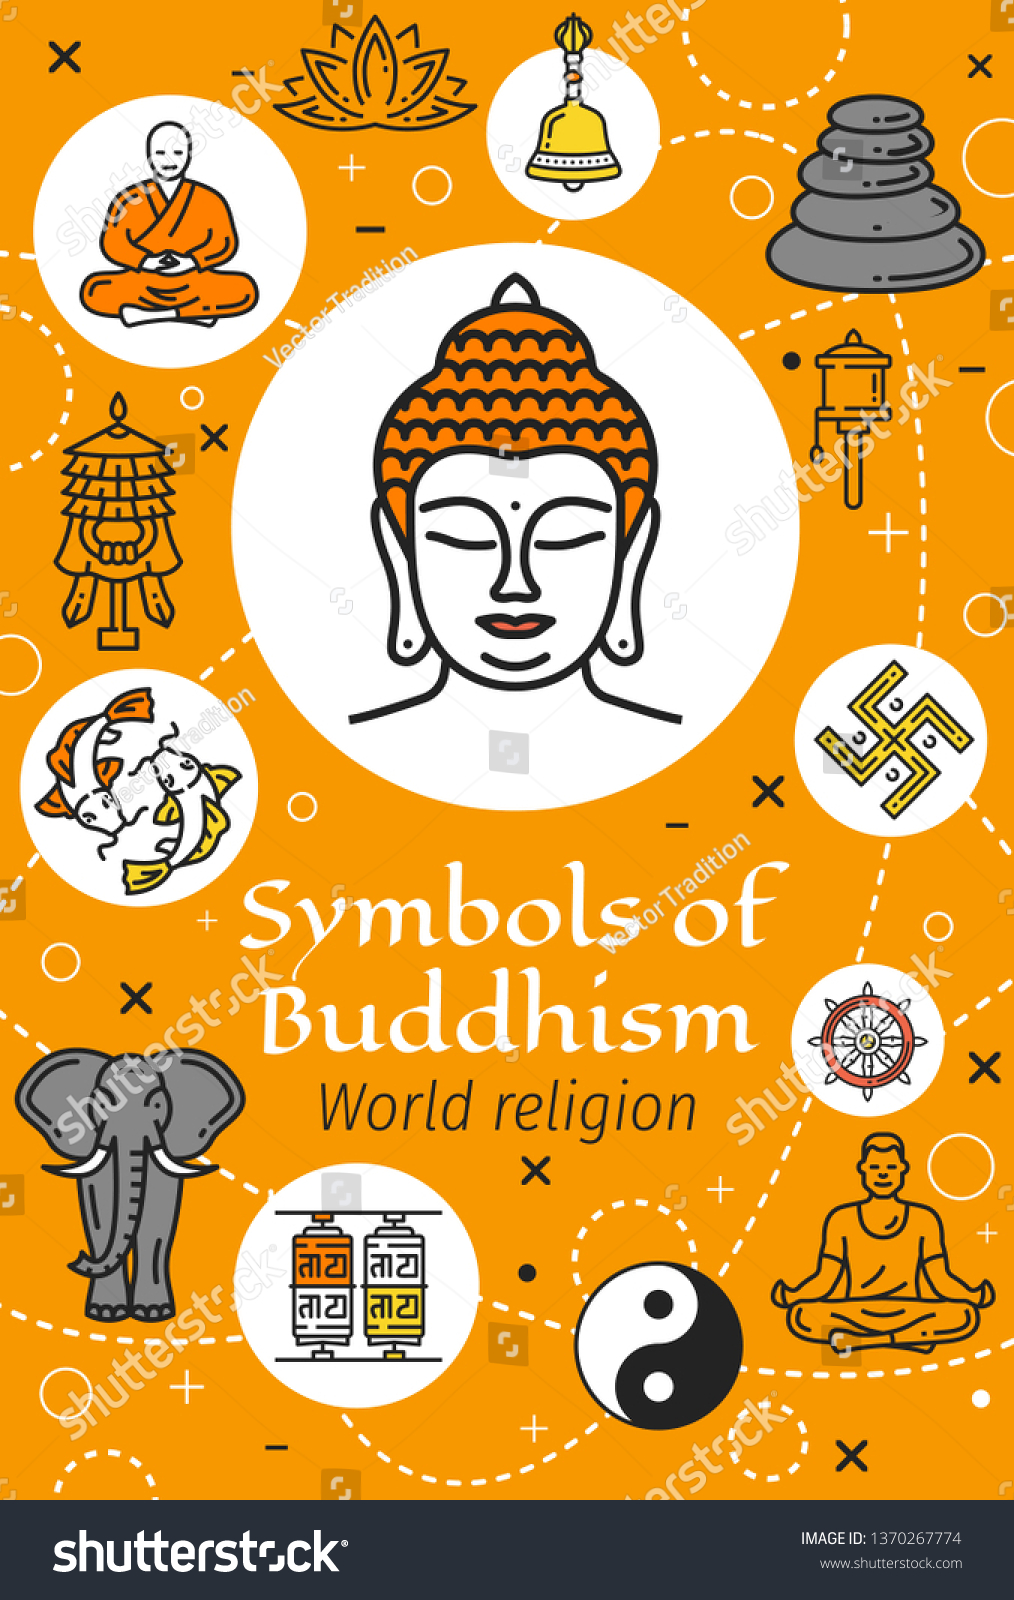 Buddhism religious symbols vector poster with oriental religion thin line icons. Buddha, buddhist and yoga, lotus, tibetan monk and dharma wheel, fishes, yin yang and prayer wheels, ritual bell, stupa #1370267774